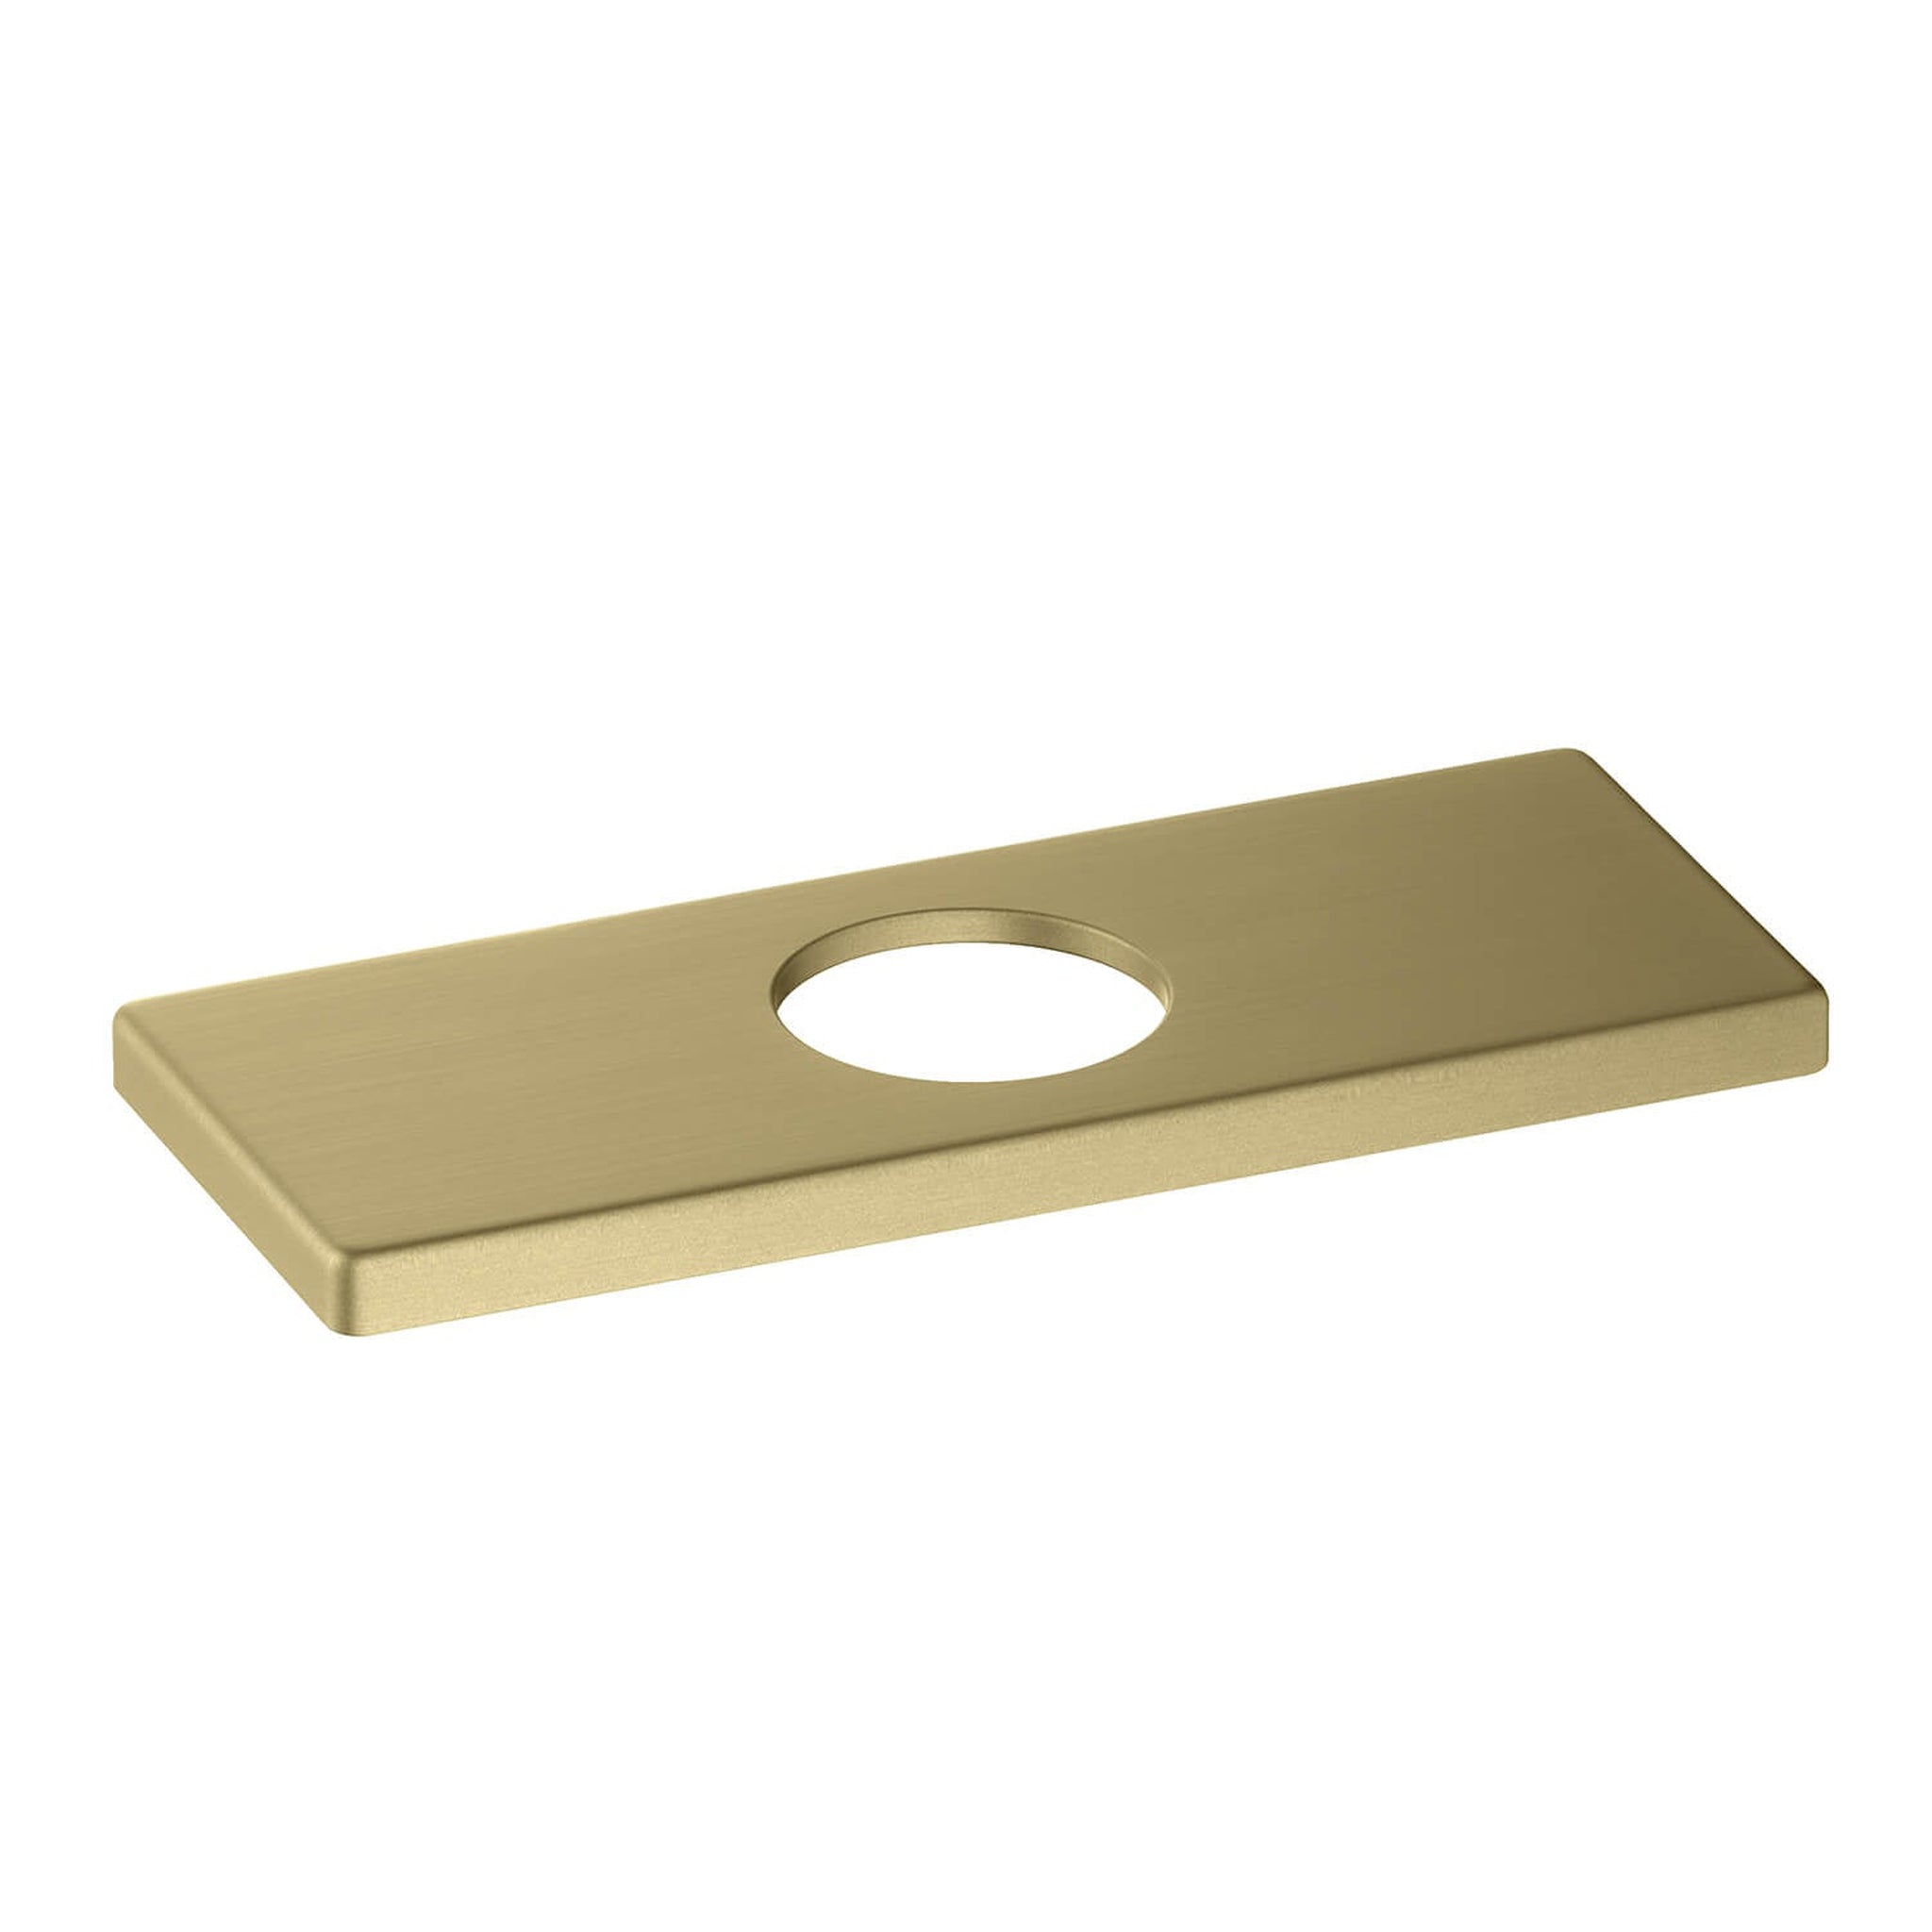 KIBI, KIBI Cubic 6" Stainless Steel Faucet Hole Cover in Brushed Gold Finish